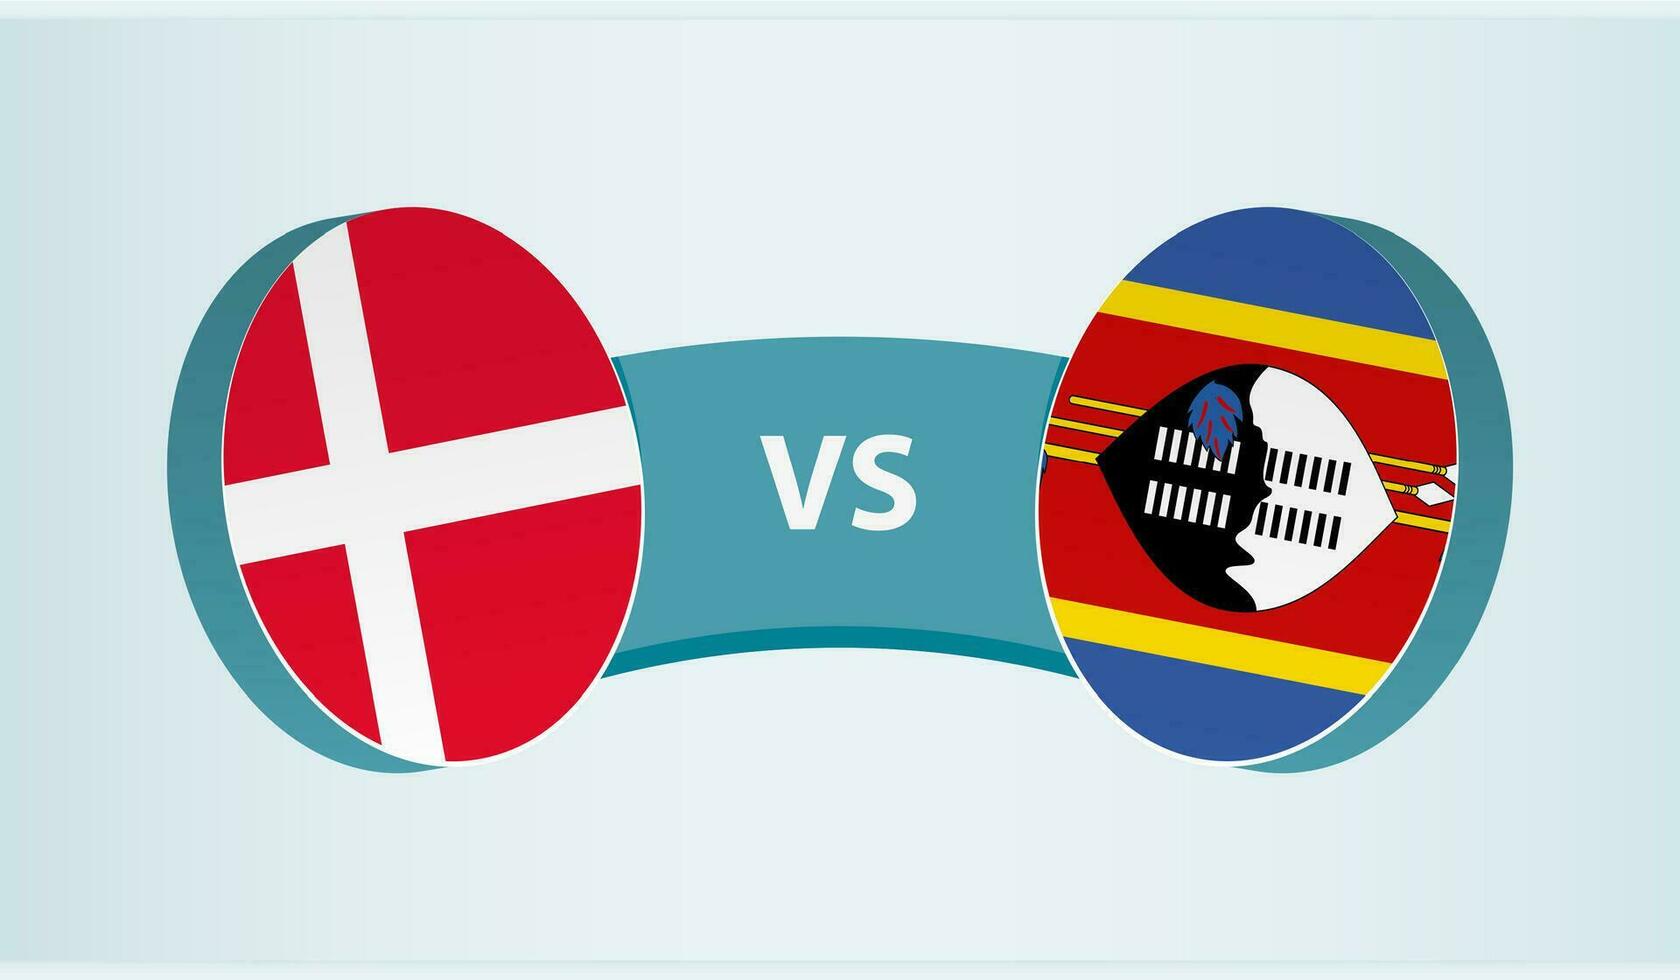 Denmark versus Swaziland, team sports competition concept. vector